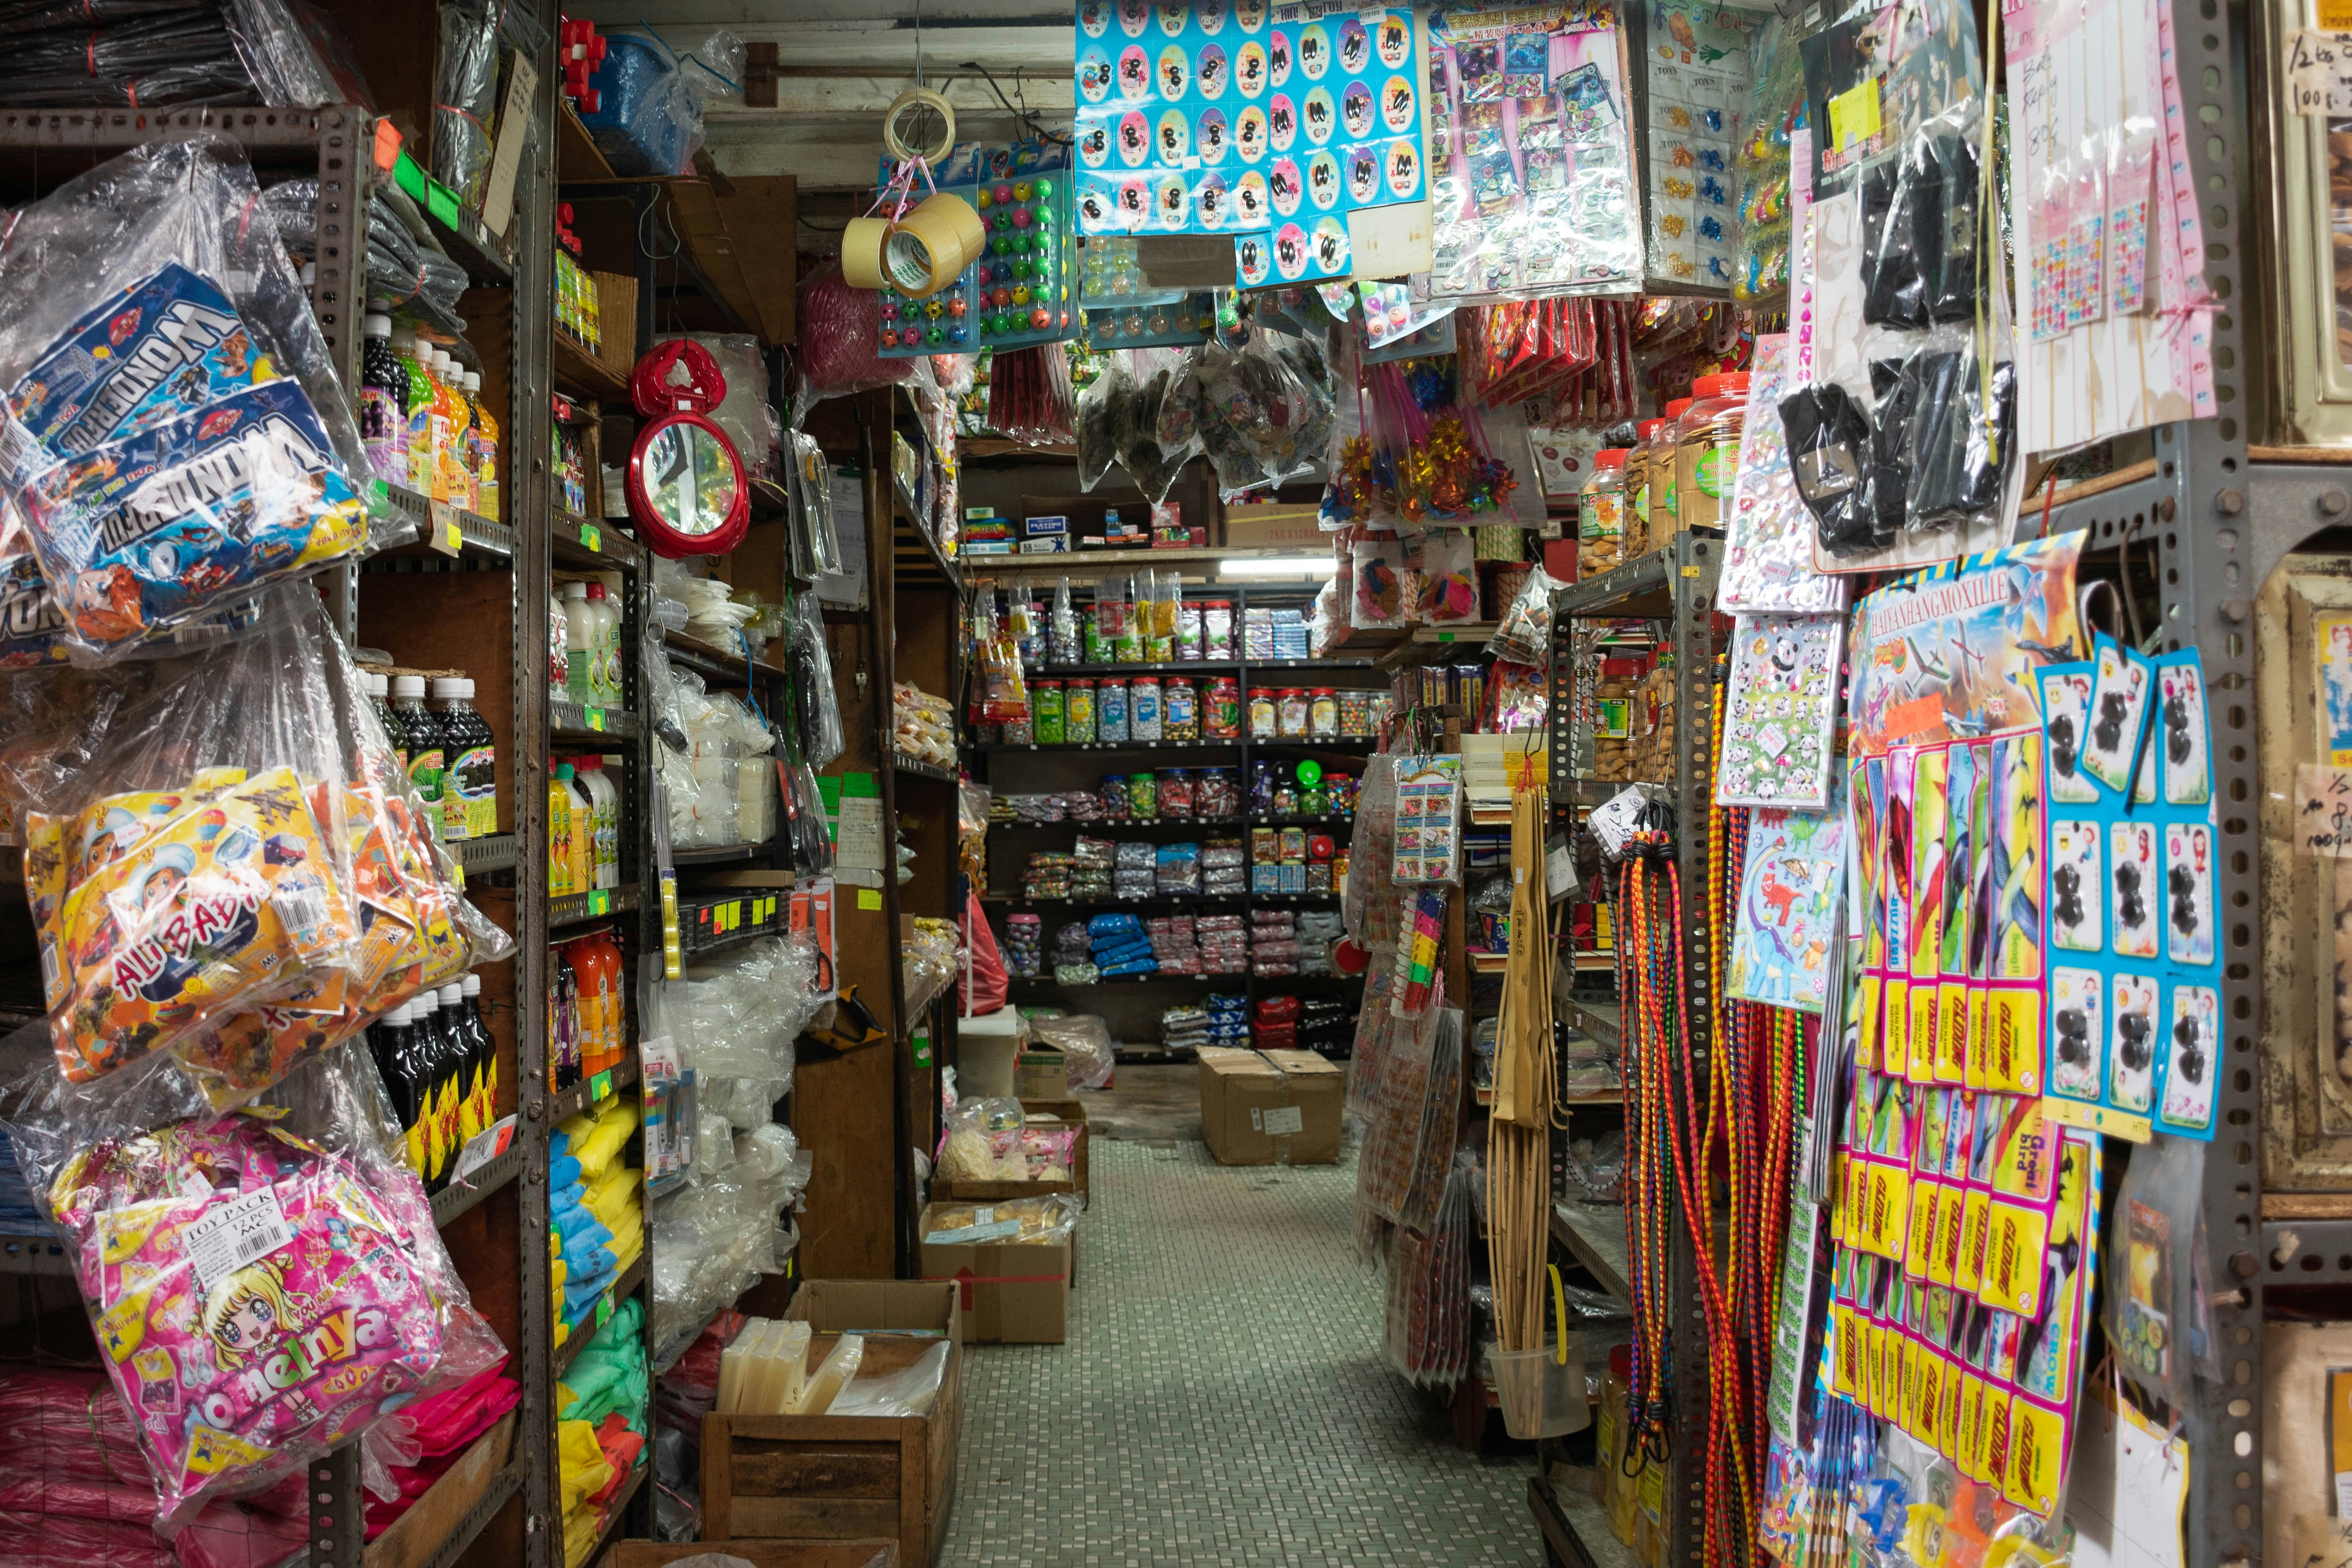 The interior of an old Chinese grocery store.